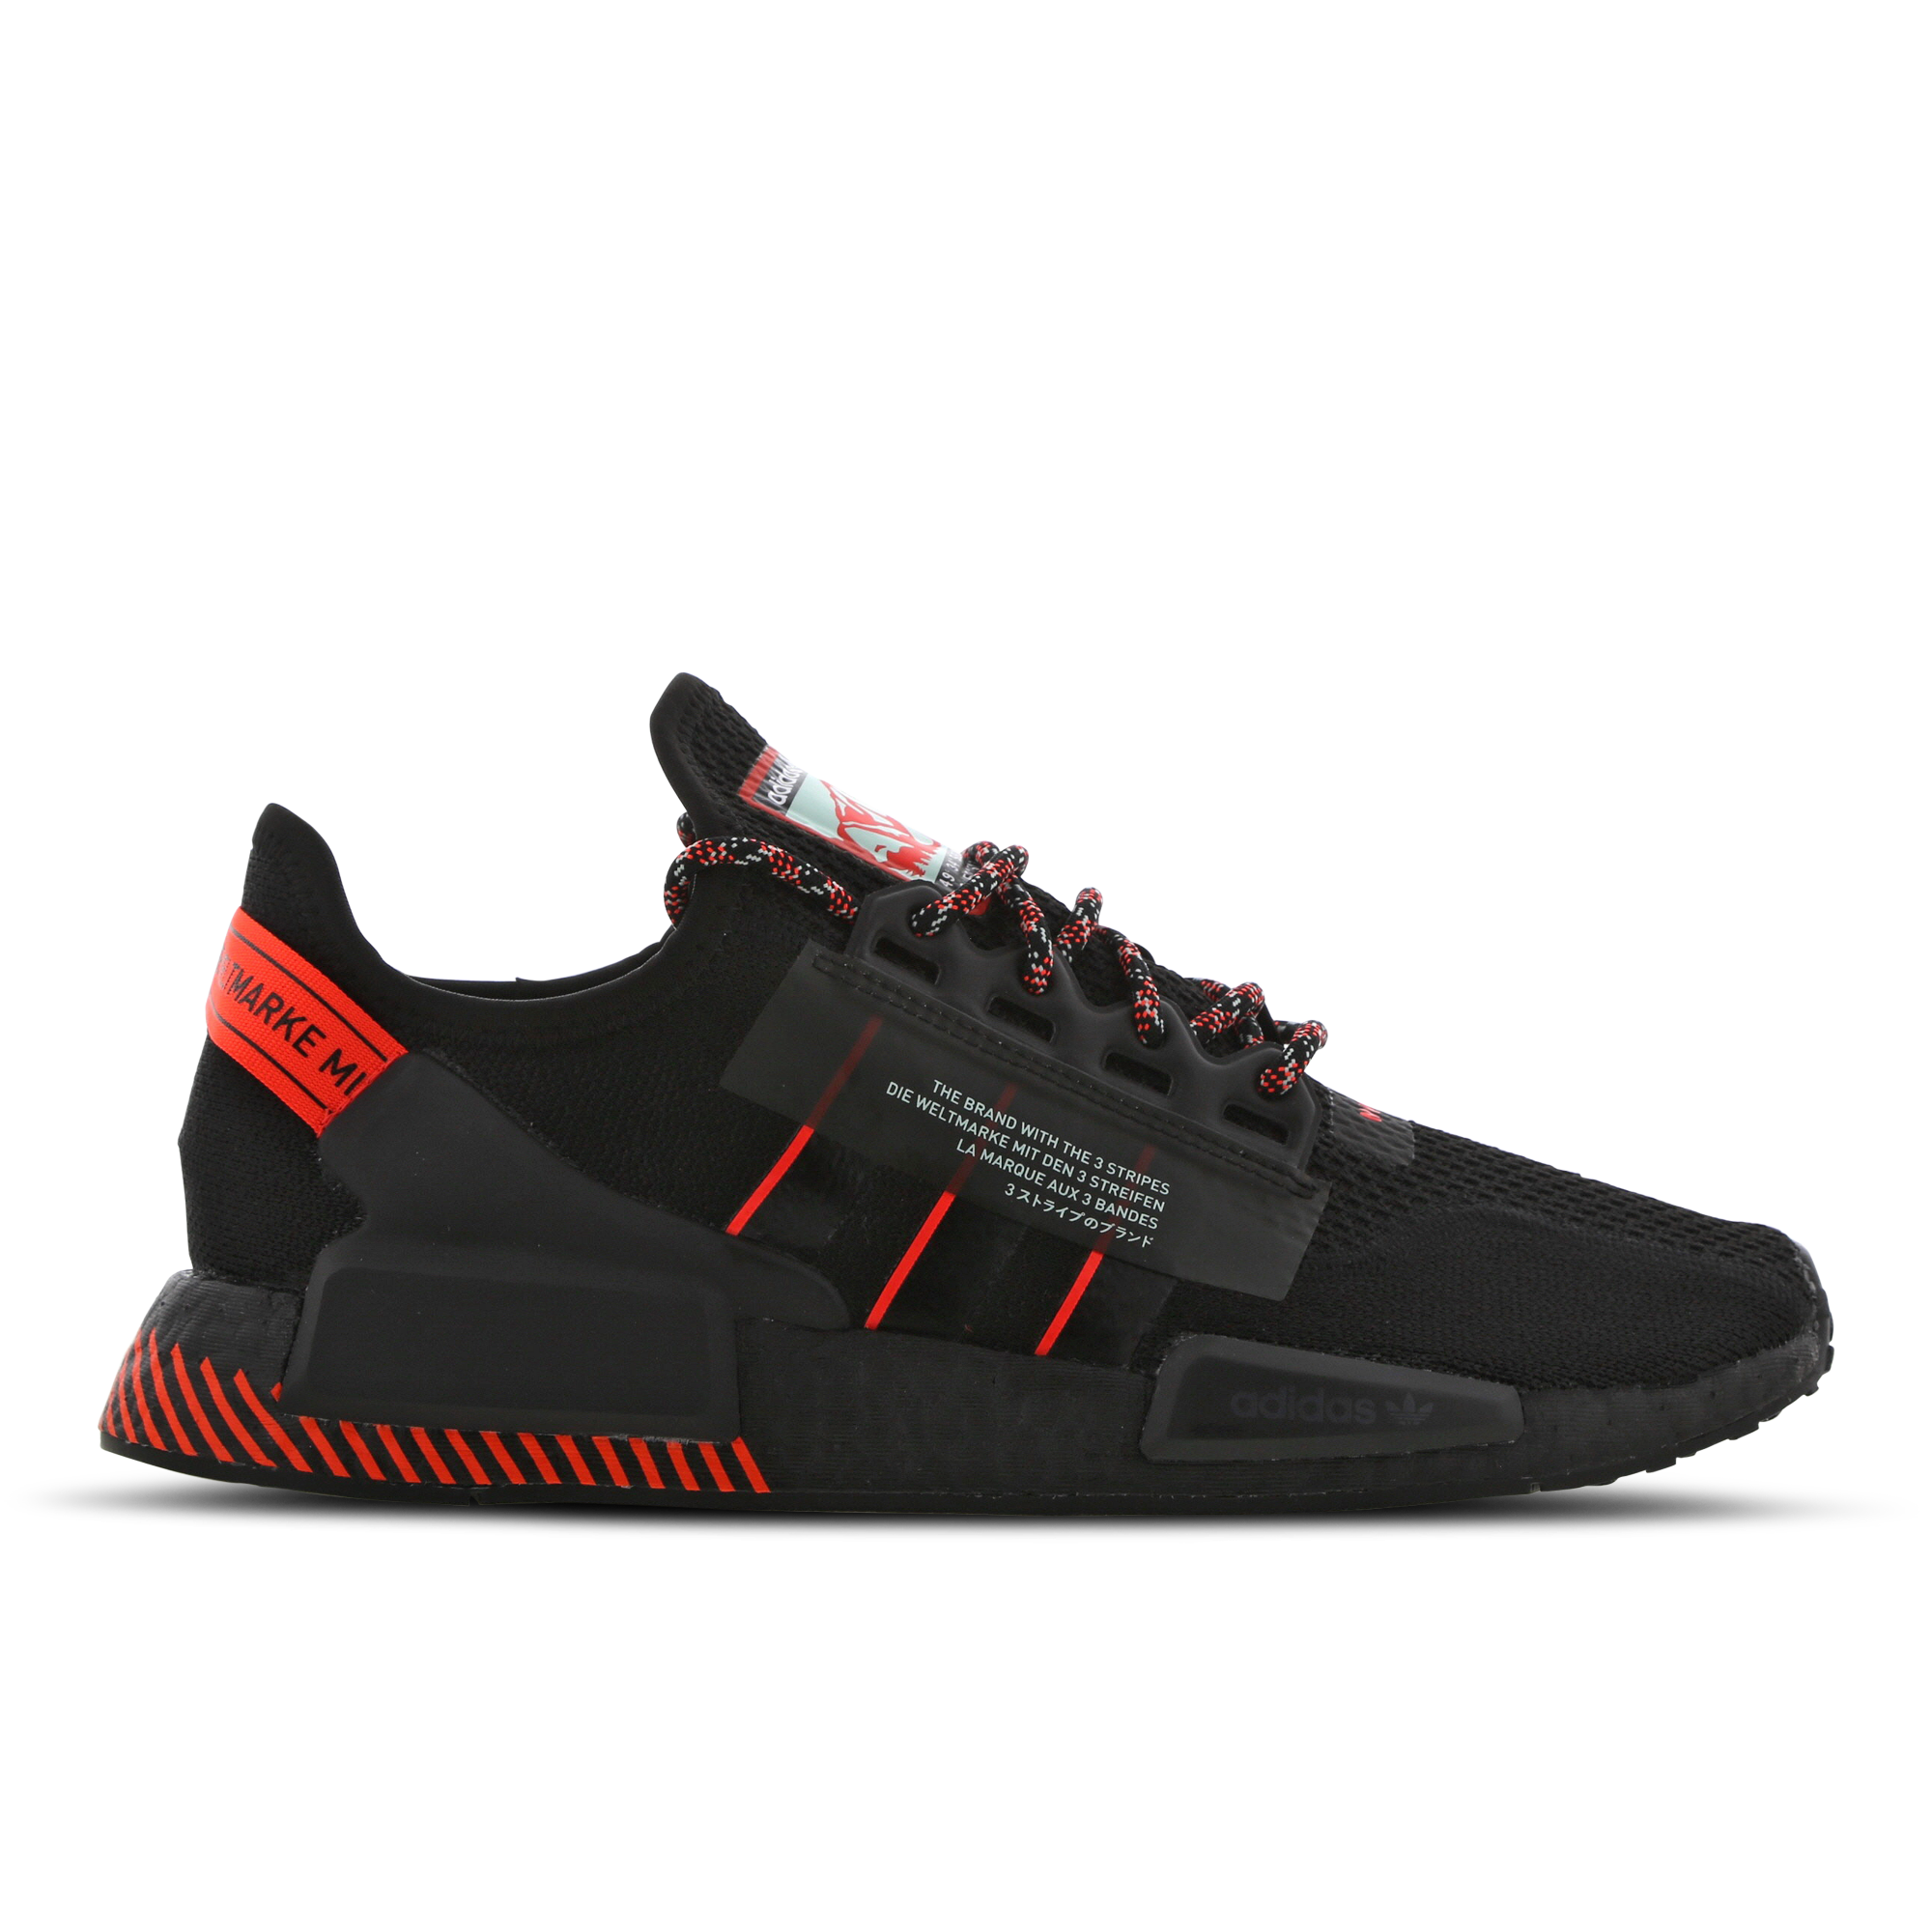 adidas NMD R1 Core Black Solar Red EG7953 Release Date SBD